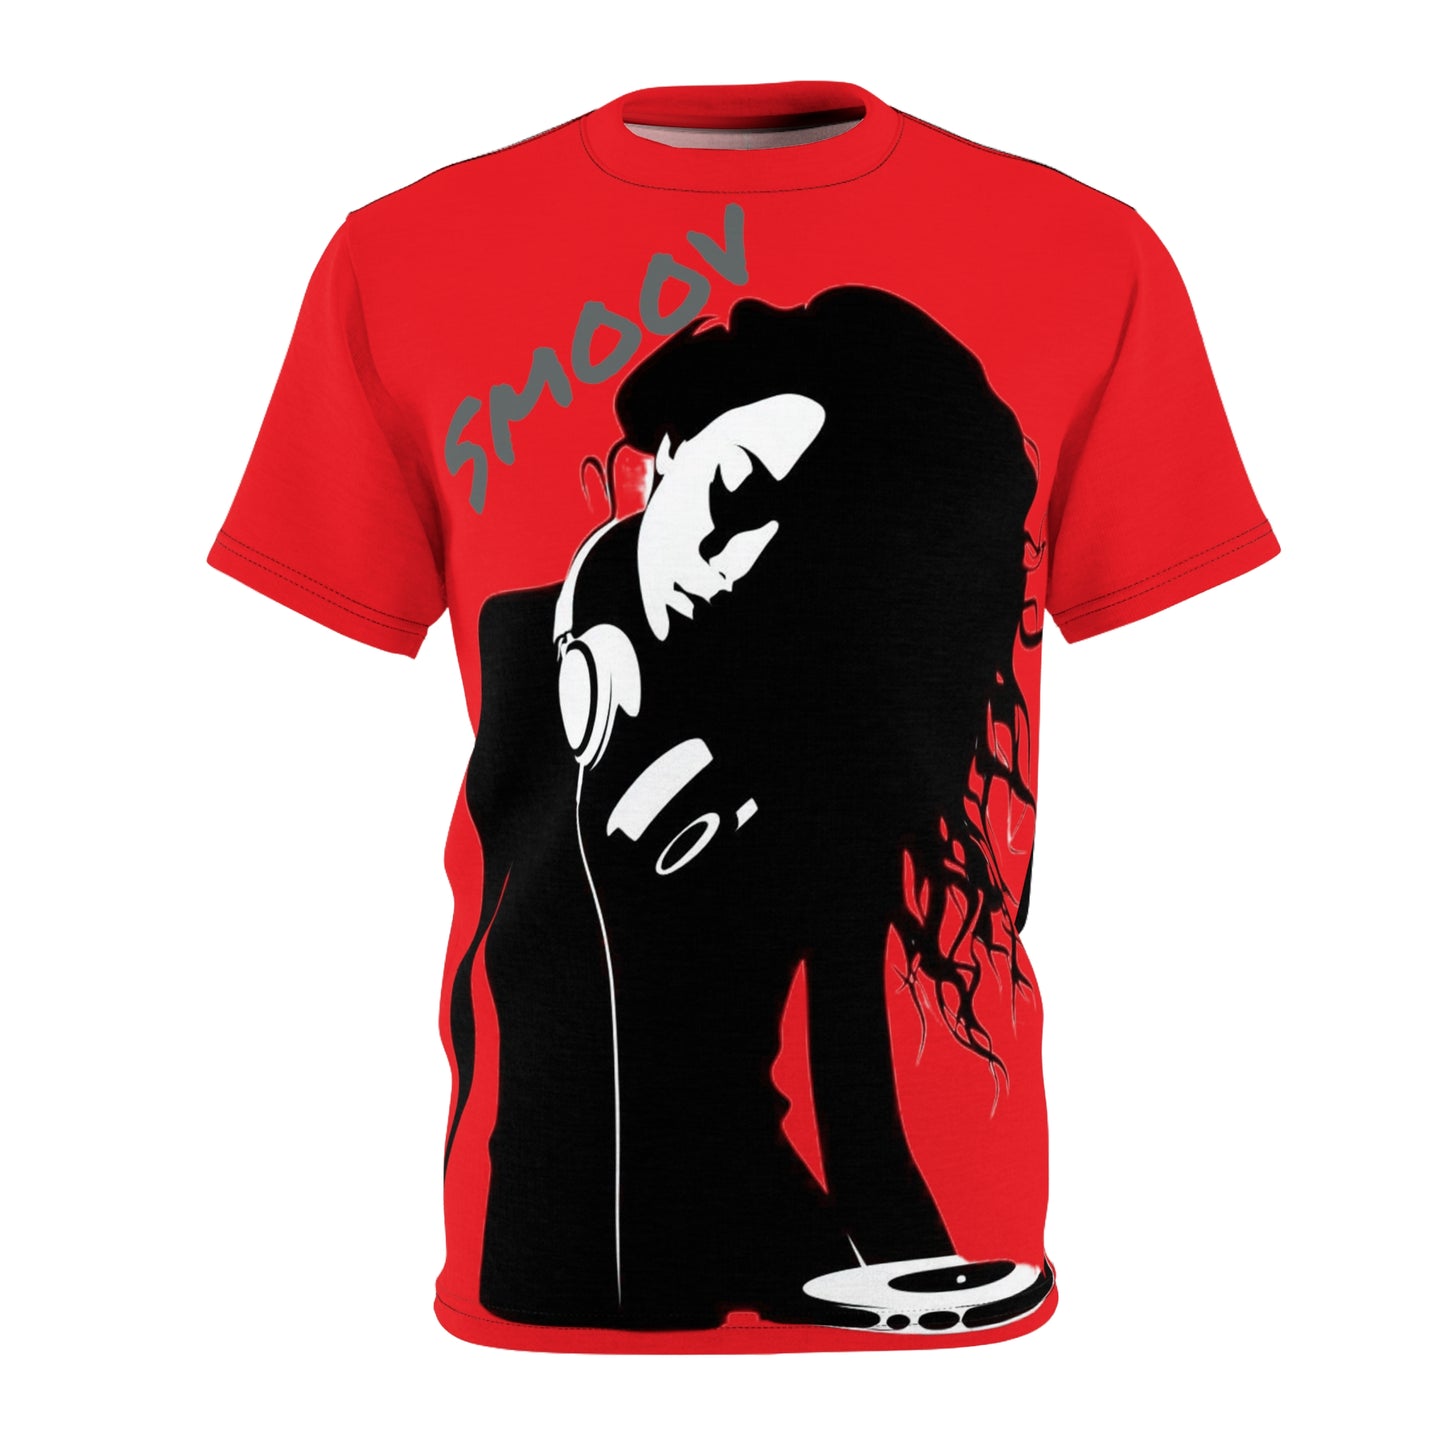 Smoov Groov in Red - Front/Back Unisex Cut & Sew Tee (AOP)